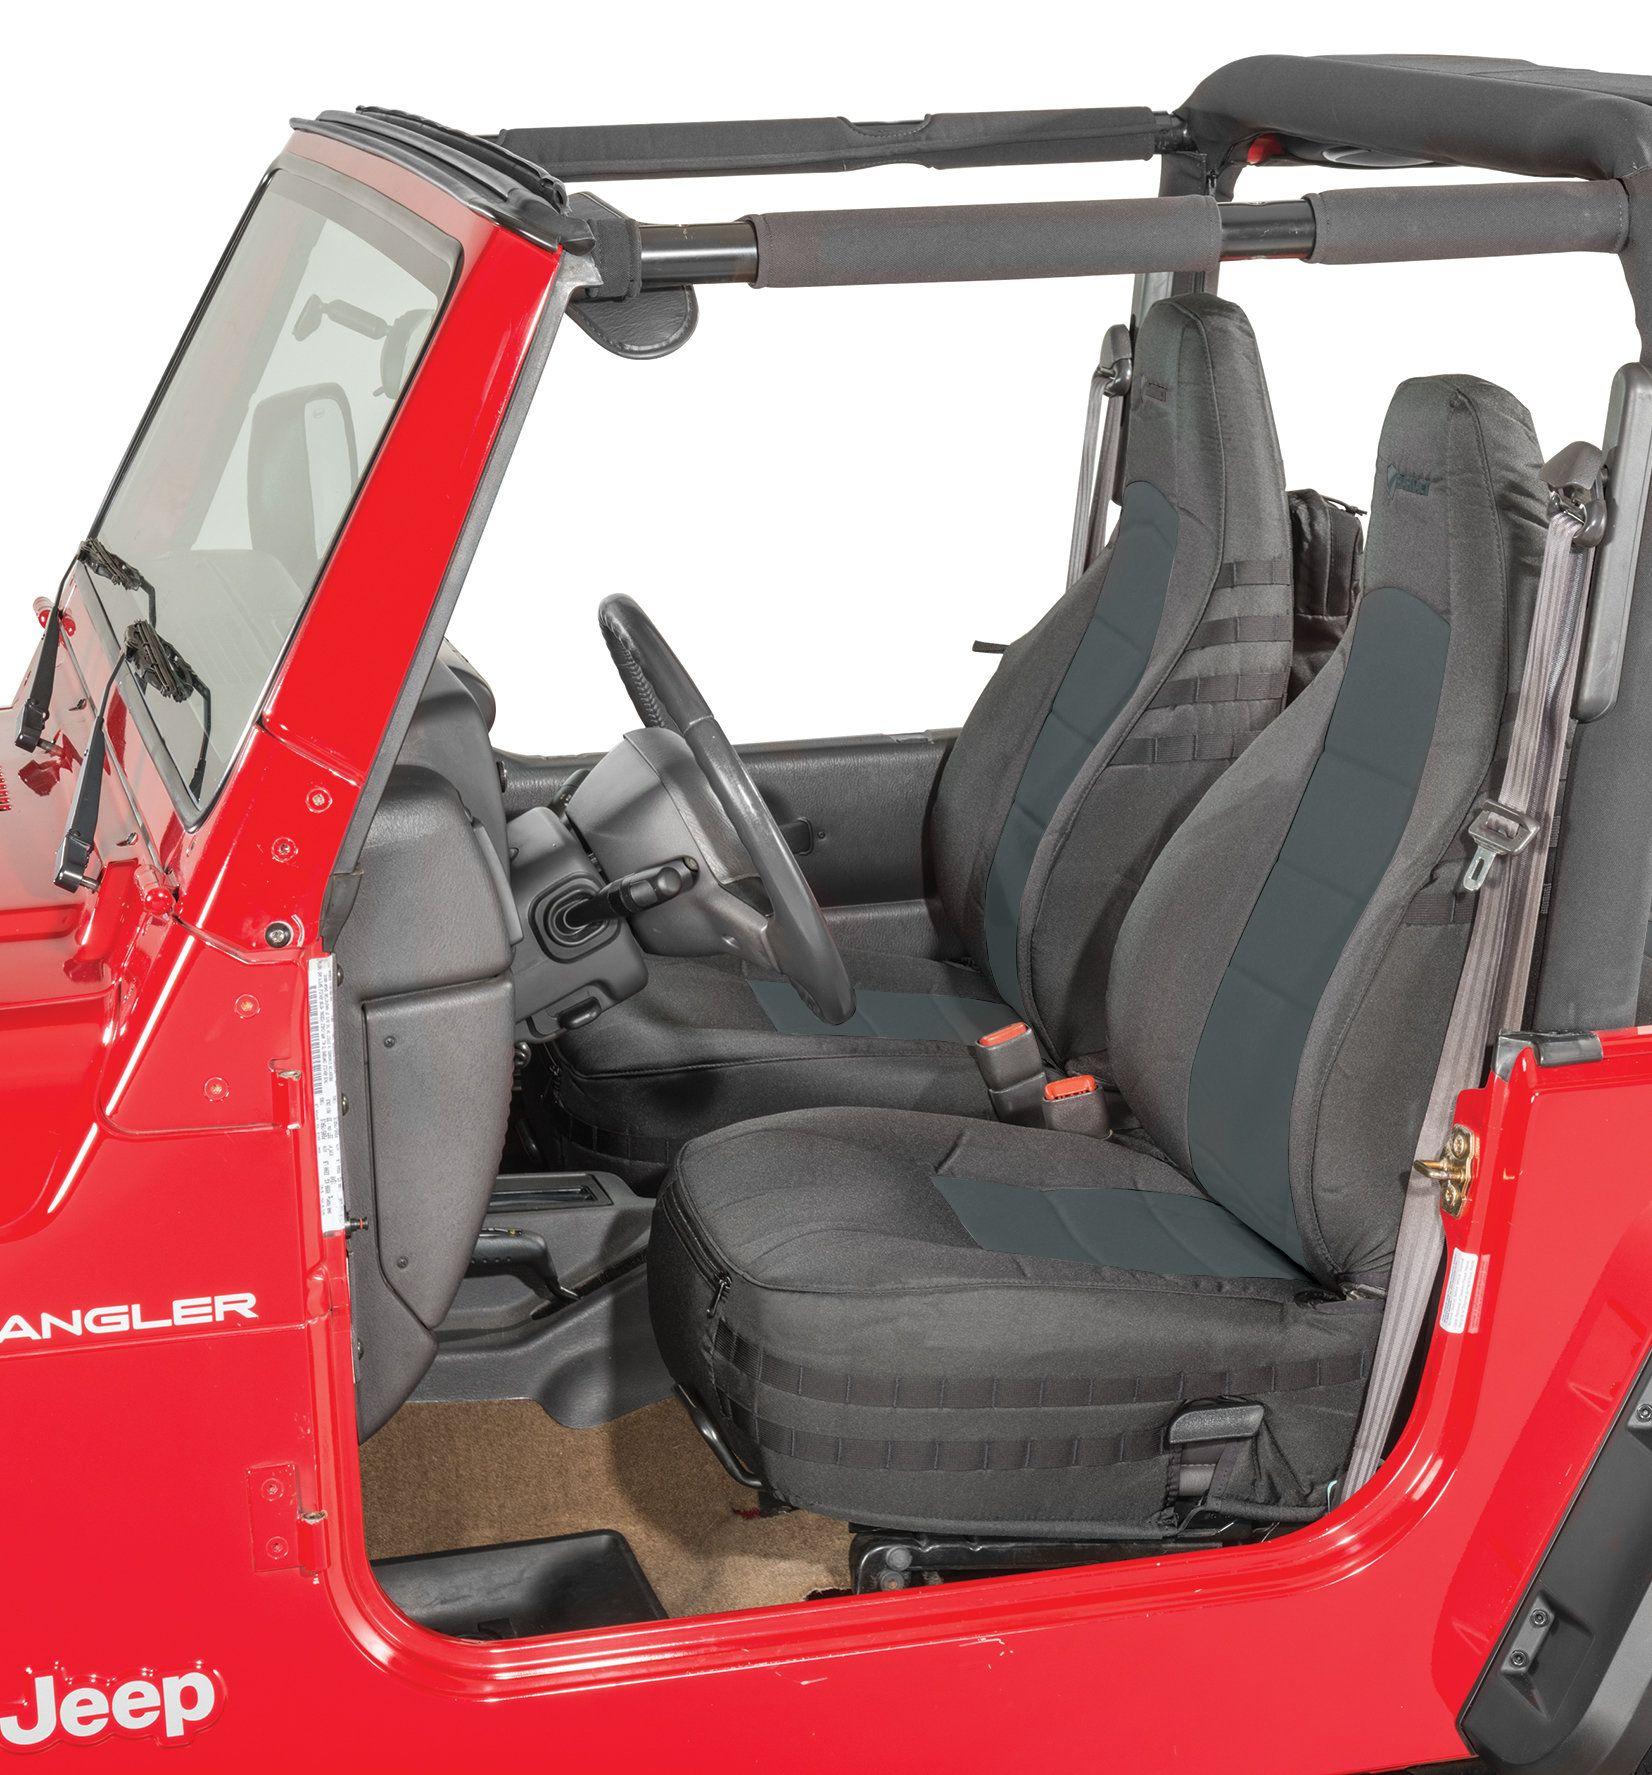 Cool Jeep Logo - Jeep: Cool Seat Covers For Jeep Wrangler Inspiration Jeep Logo Seat